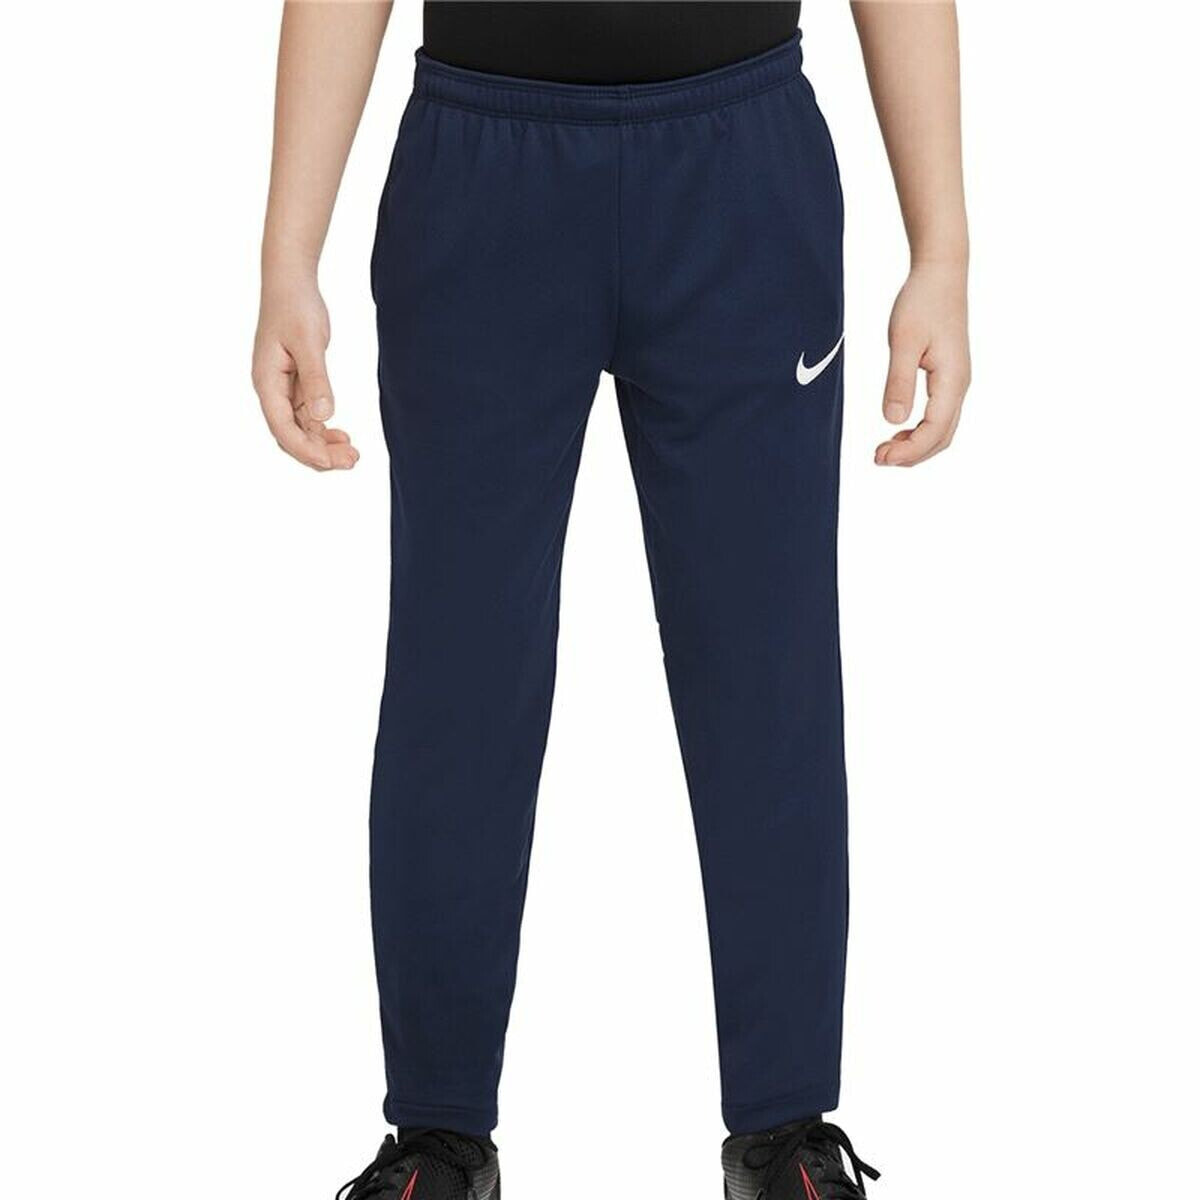 Football Training Trousers for Adults Nike Dri-FIT Academy Pro Dark blue Unisex